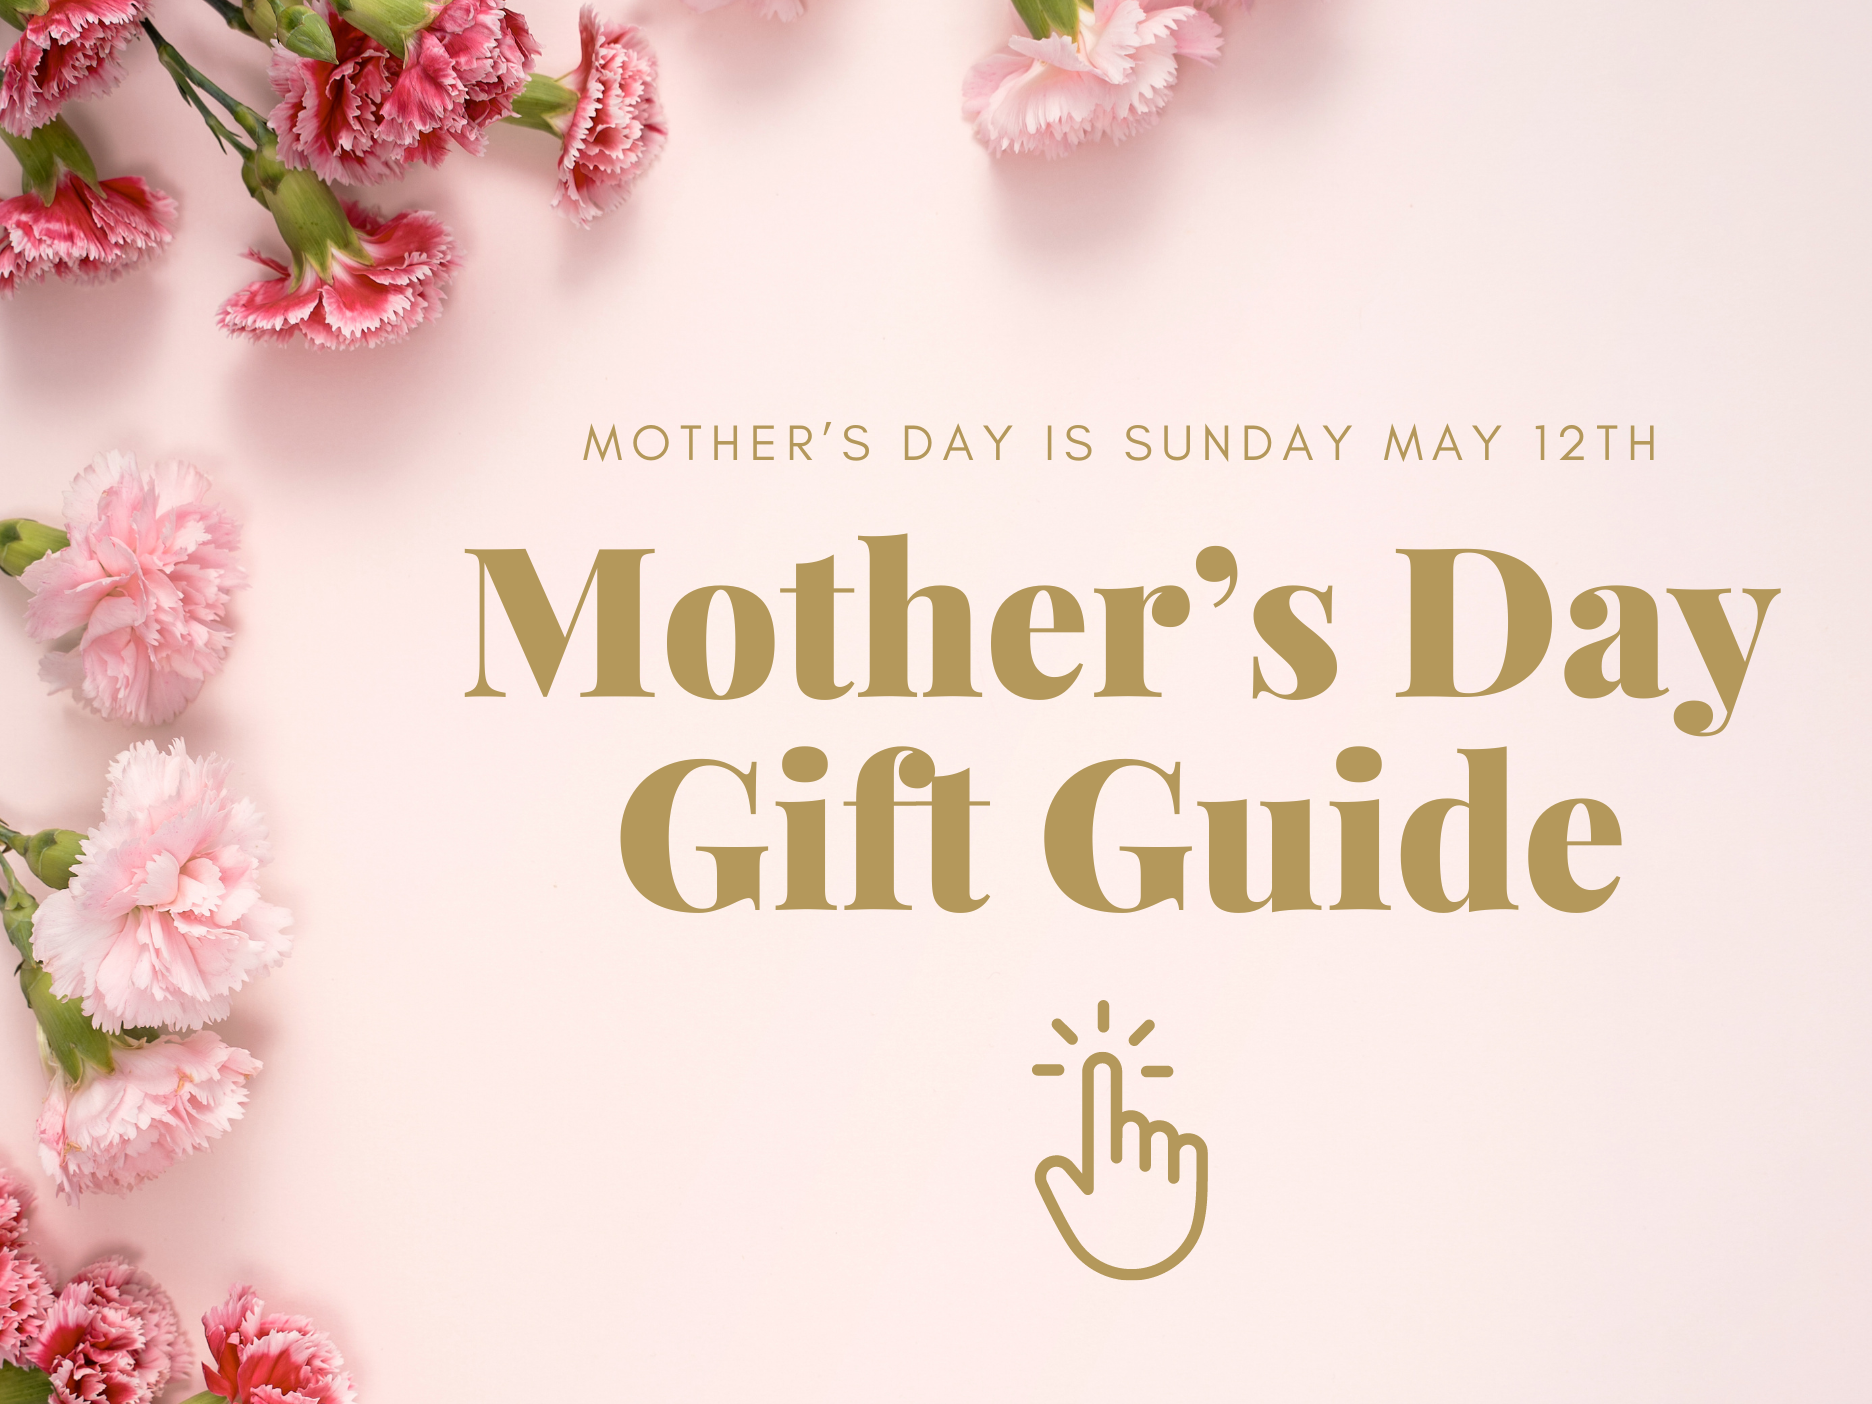 Shop Our Mother's Day Gift Guide